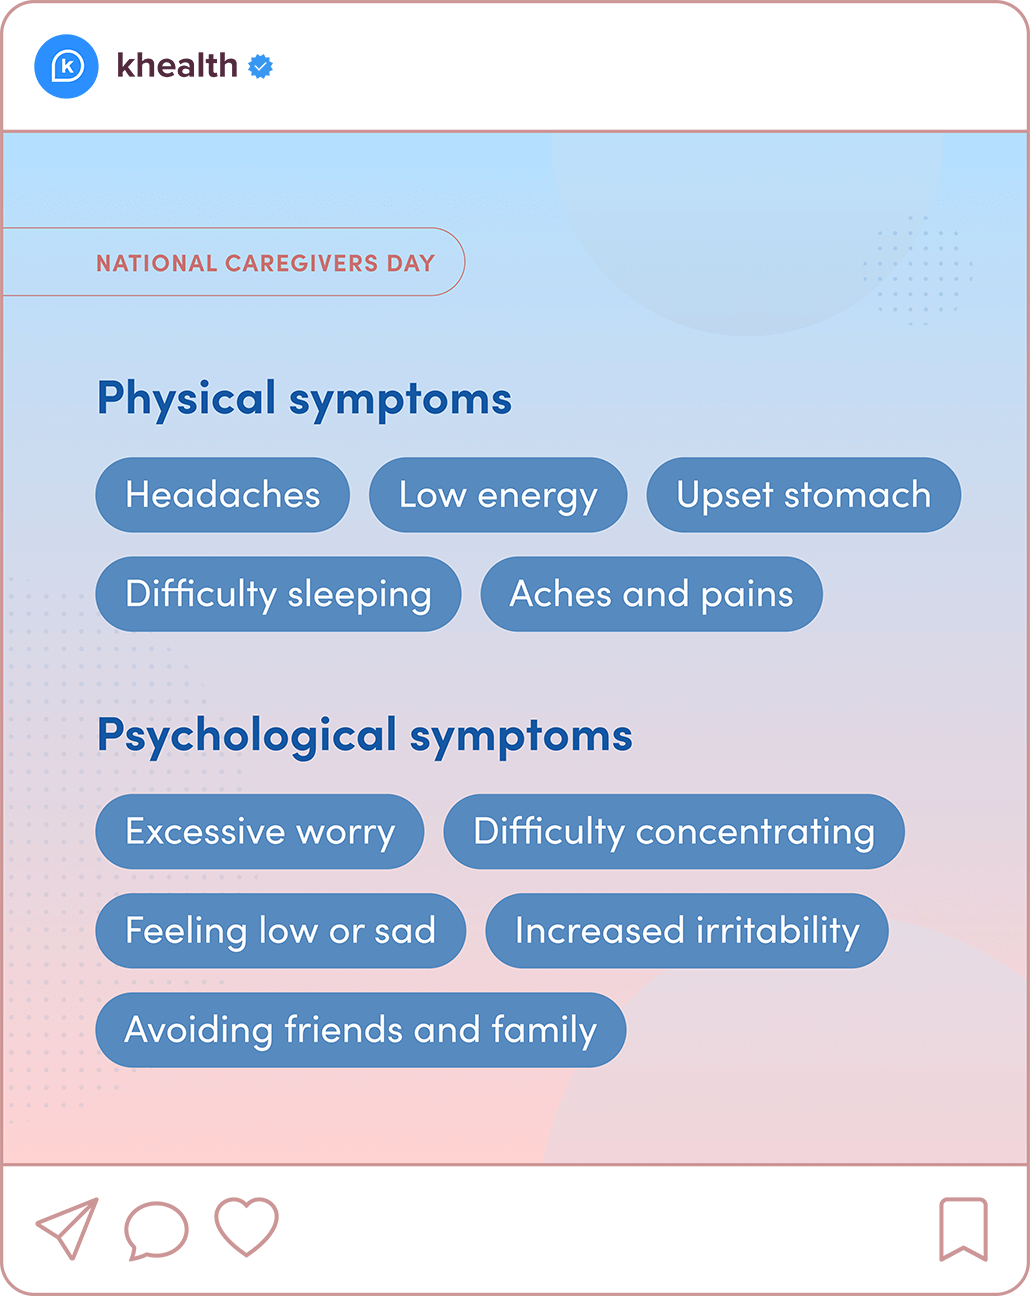 Third slide of an Instagram carousel post listing the physical and psychological symptoms of caregiver burnout